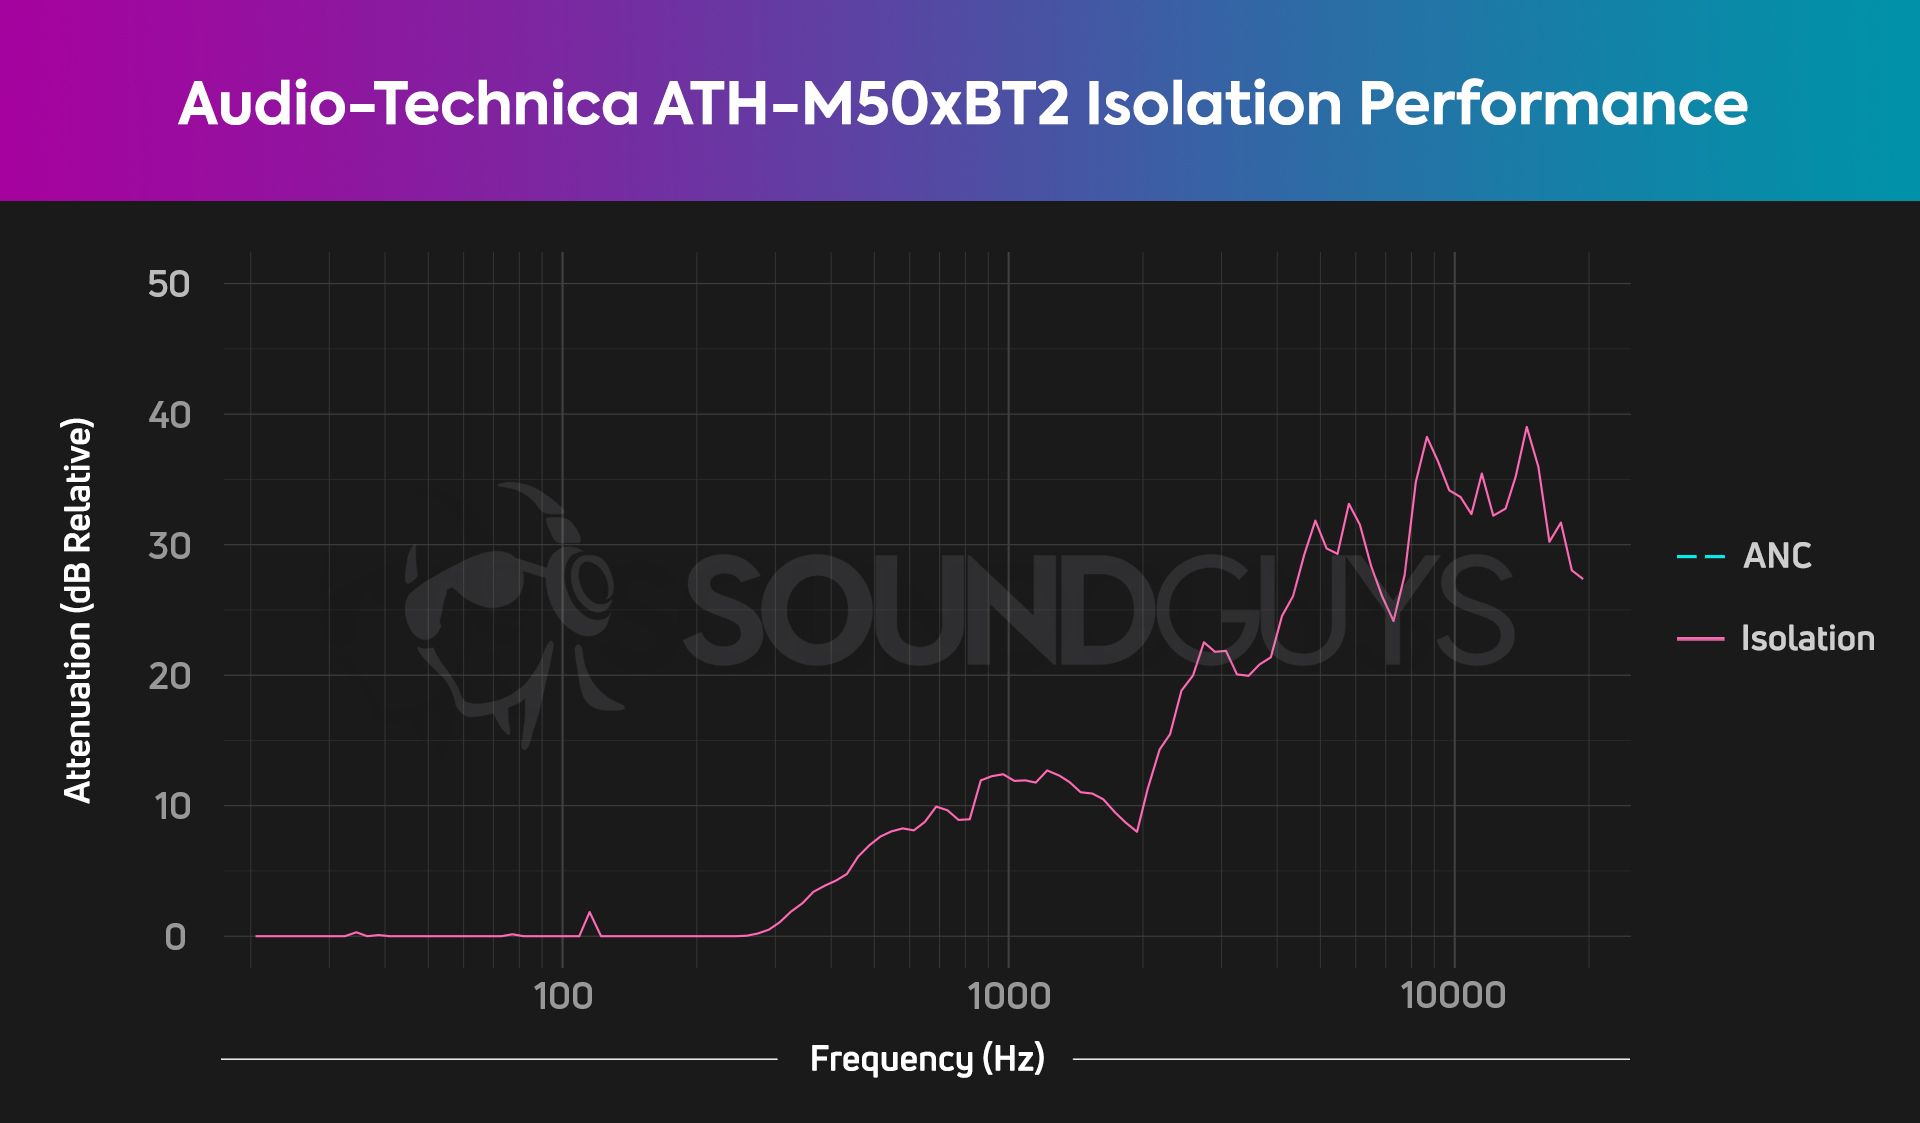 Isolation measurement chart for Audio-Technica ATH-M50xBT2.